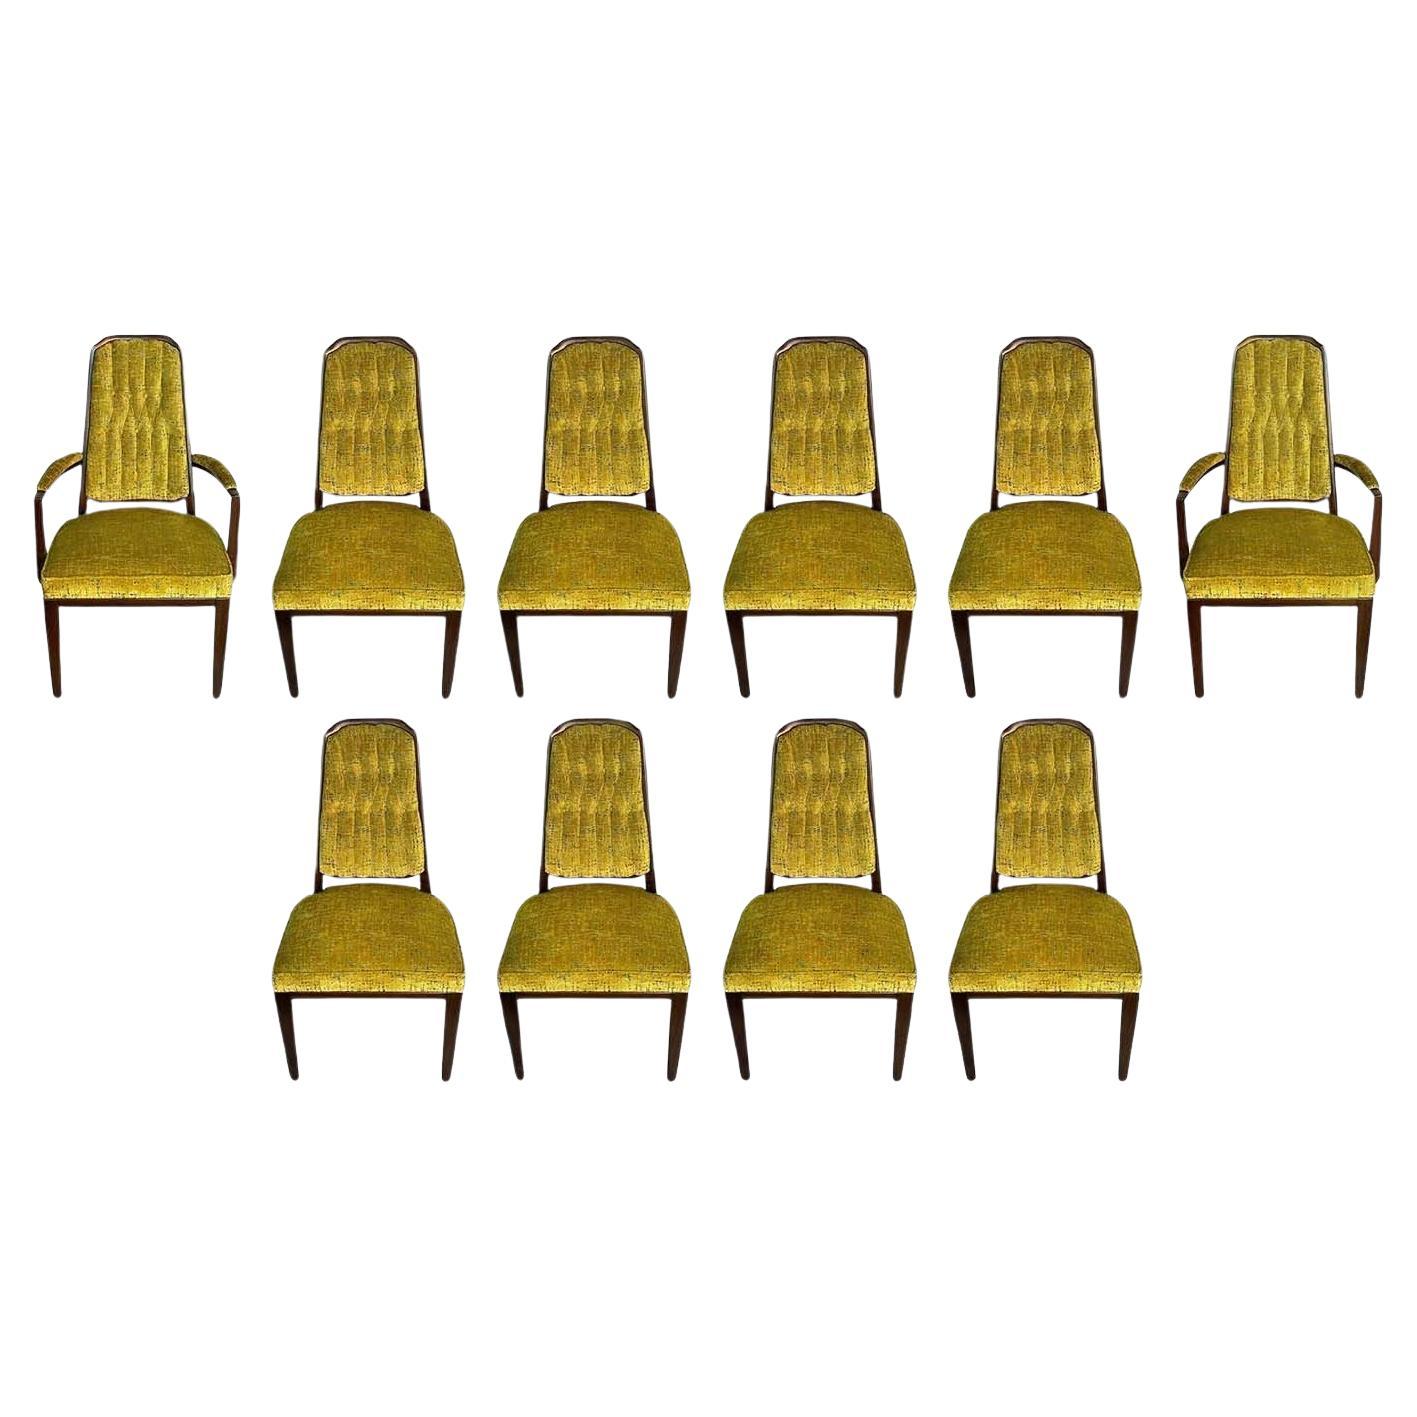 Set of 10 Vintage Monteverdi Young Chairs & Armchairs, c. 1950's For Sale